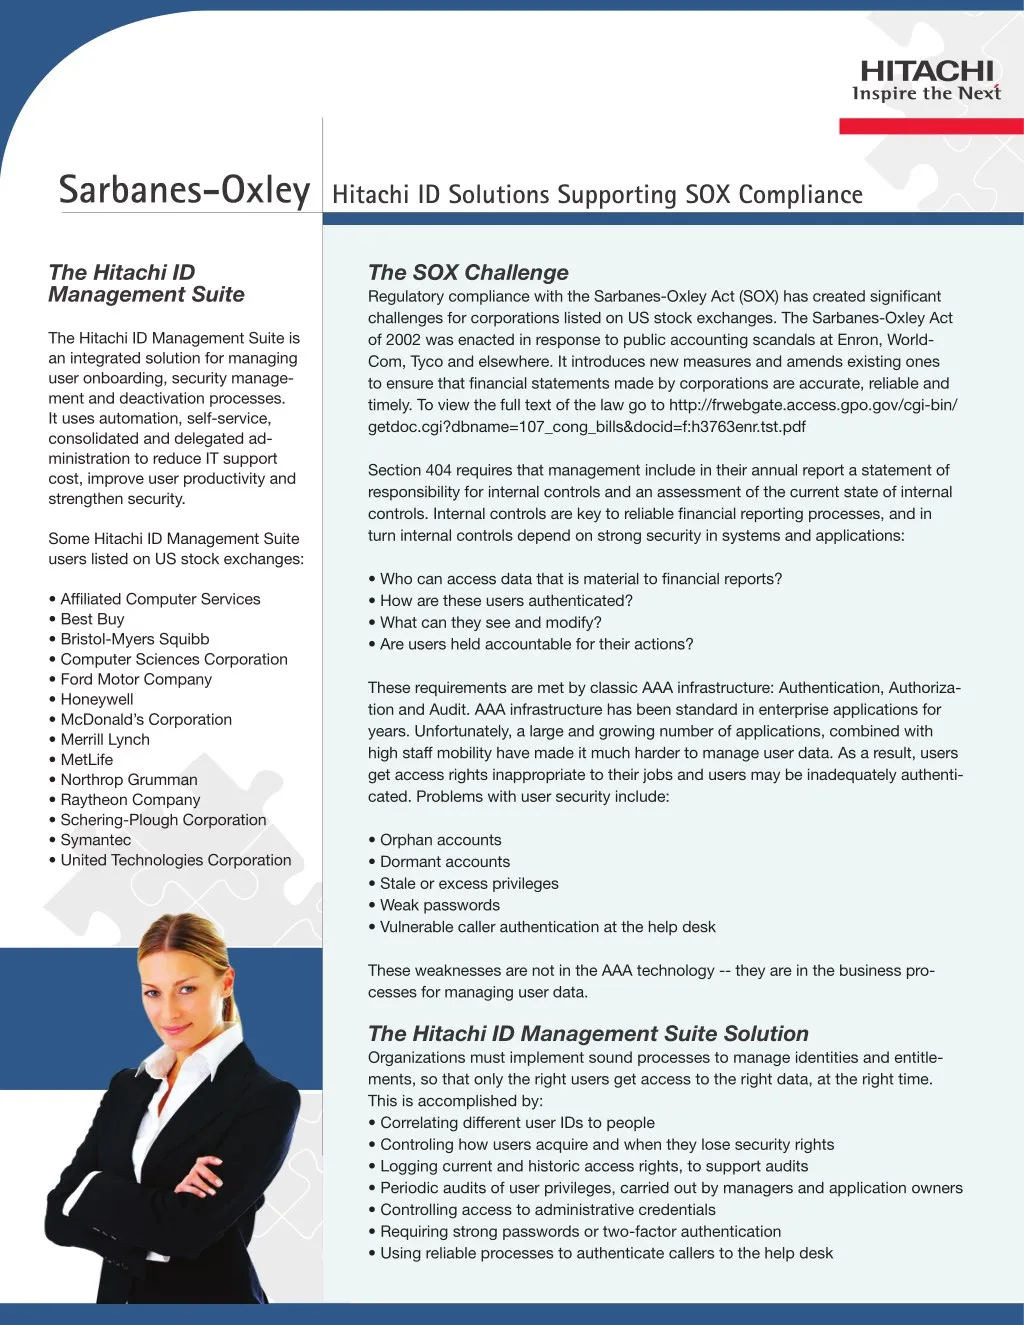 sarbanes oxley hitachi id solutions supporting